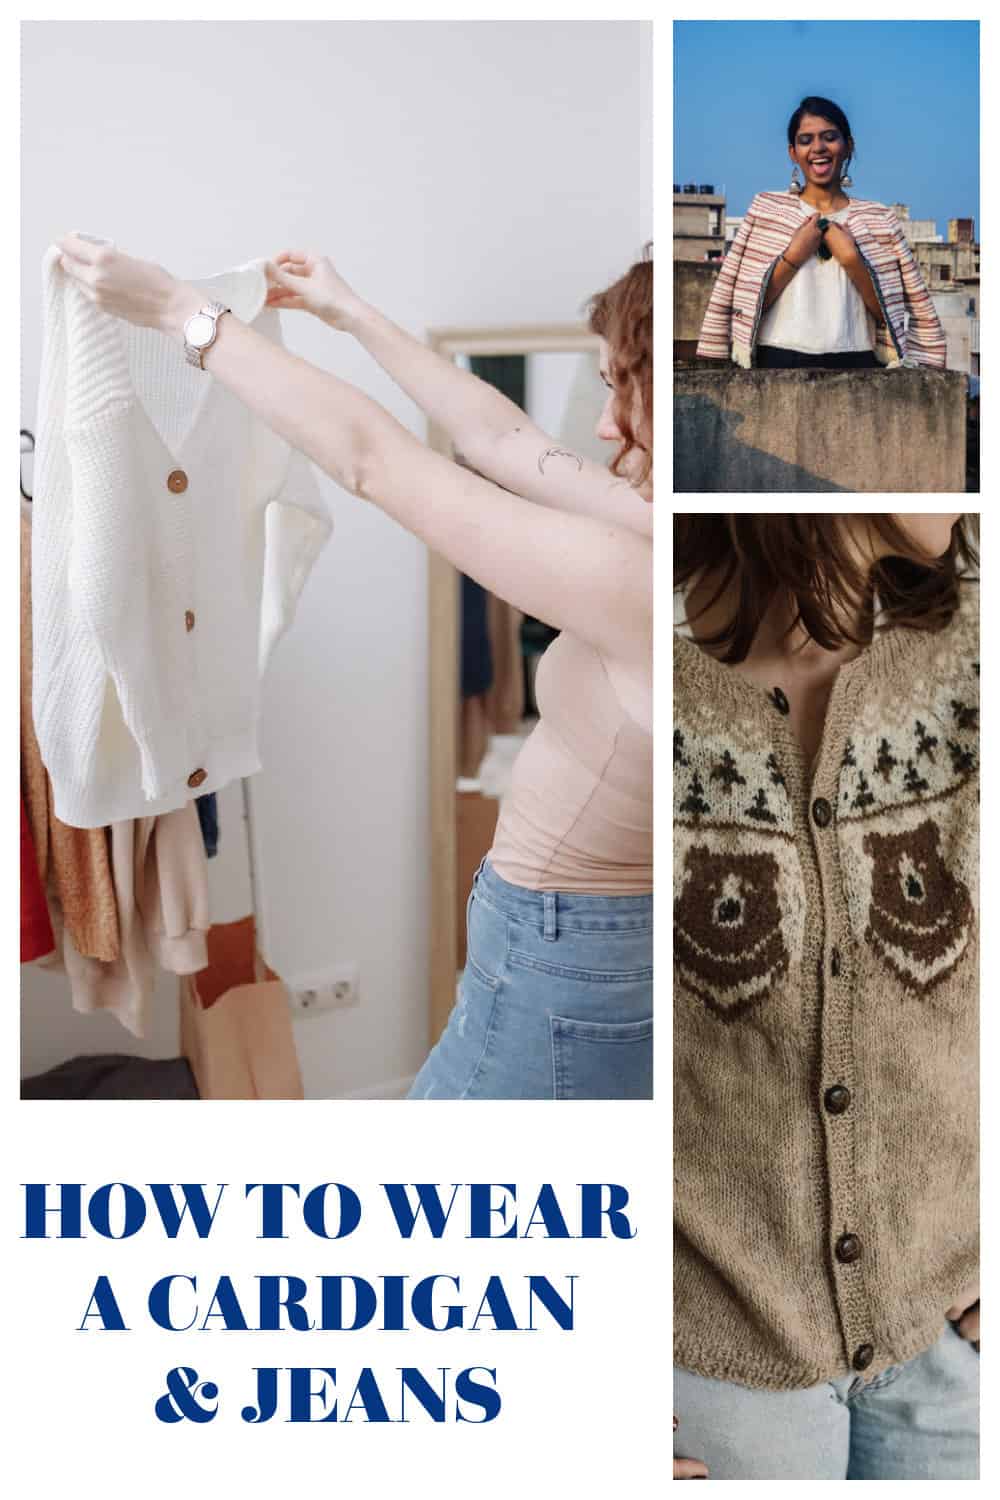 Do you know how to wear a cardigan with jeans? Learn how to wear jeans and a cardigan with these simple style tips.